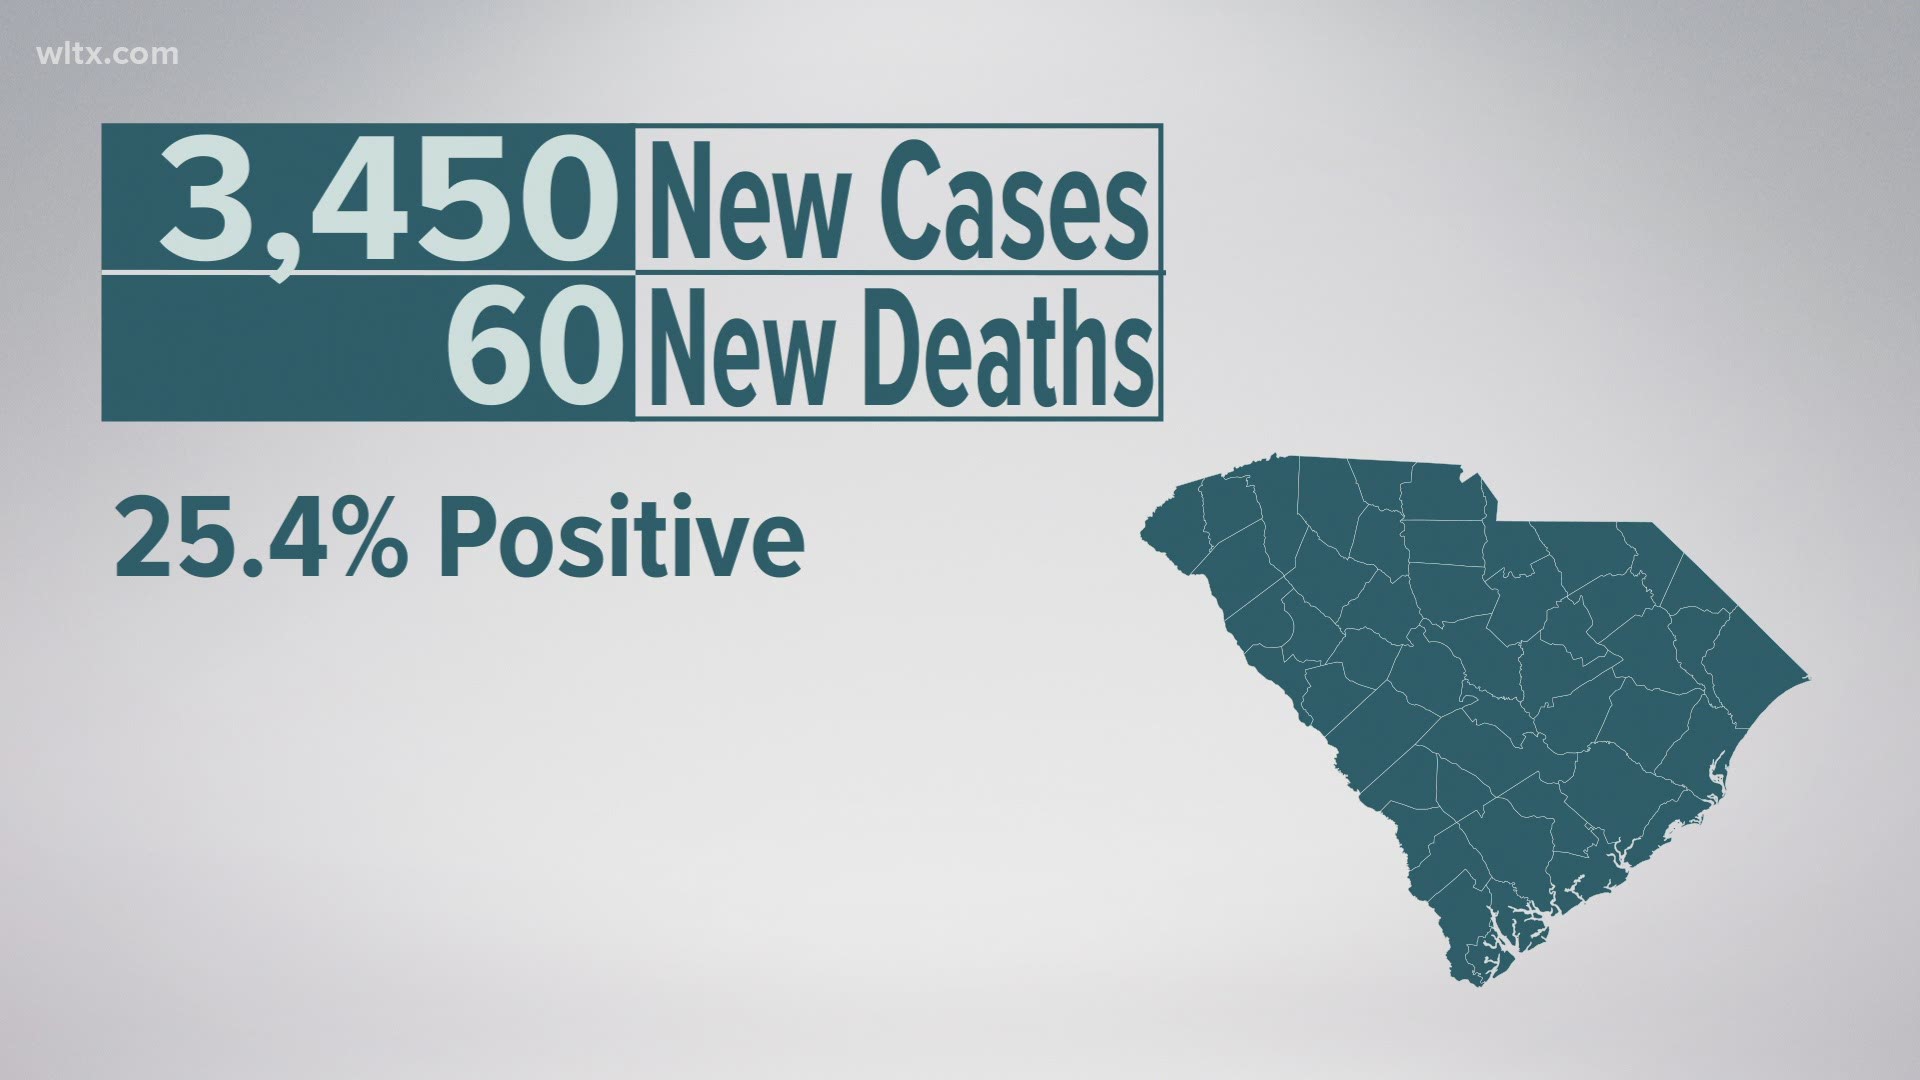 Total number of deaths attributed to coronavirus in South Carolina closing in on 6,000 according to Department of Health and Environmental Control